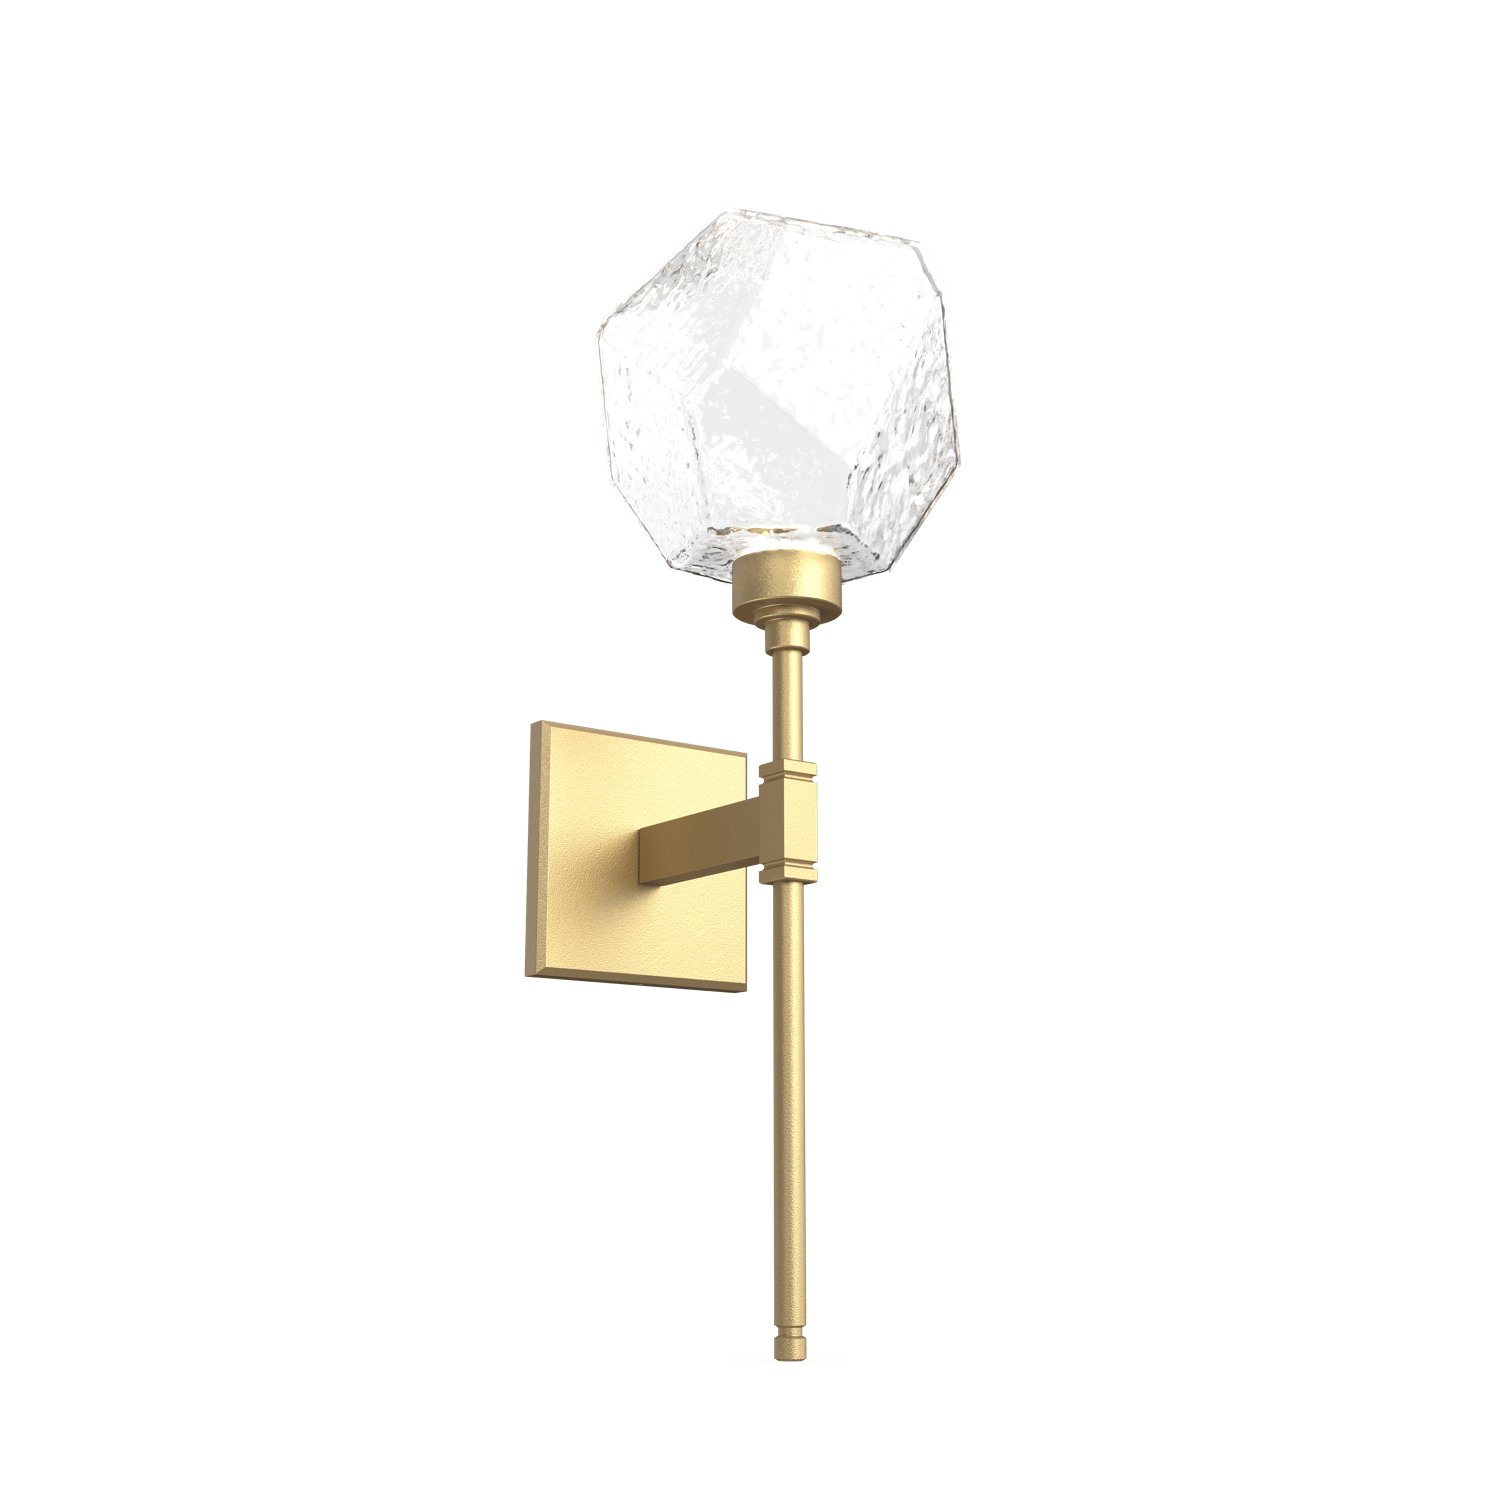 IDB0039-08-GB-C-Hammerton-Studio-Gem-belvedere-wall-sconce-with-gilded-brass-finish-and-clear-blown-glass-shades-and-LED-lamping